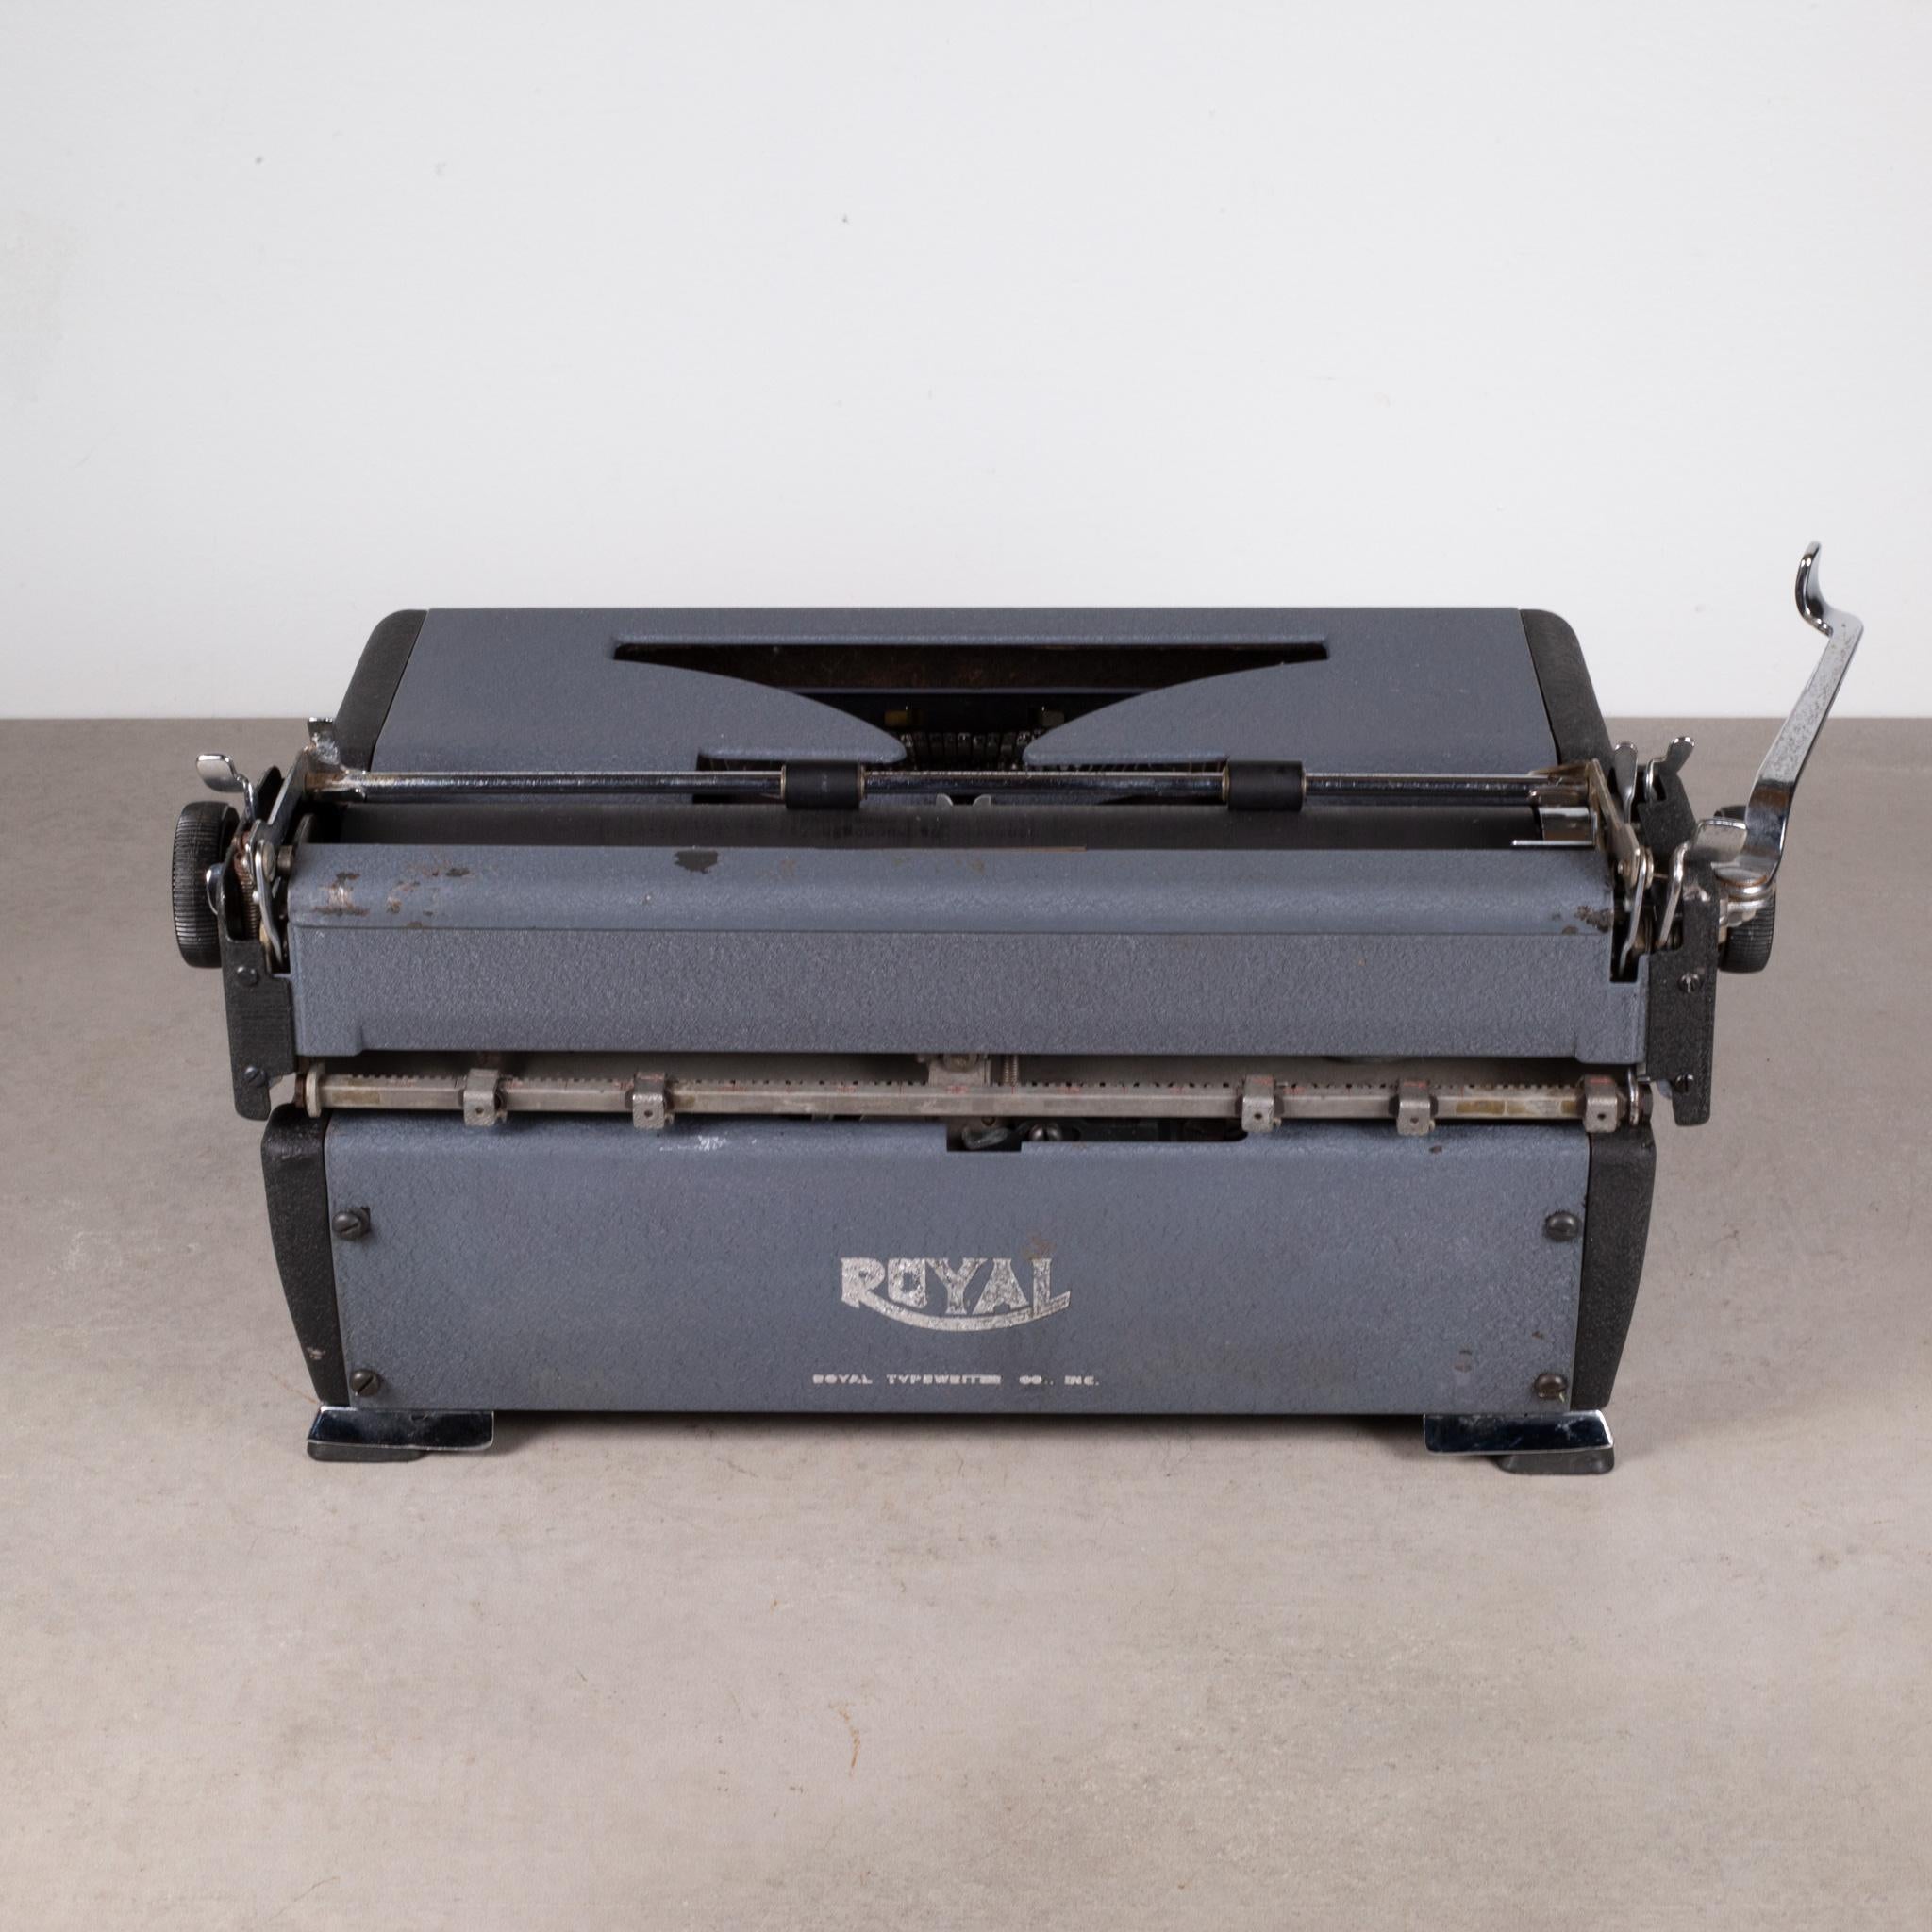 Industrial Royal Quiet DeLuxe Two Tone Typewriter and Case, c.1948  (FREE SHIPPING)